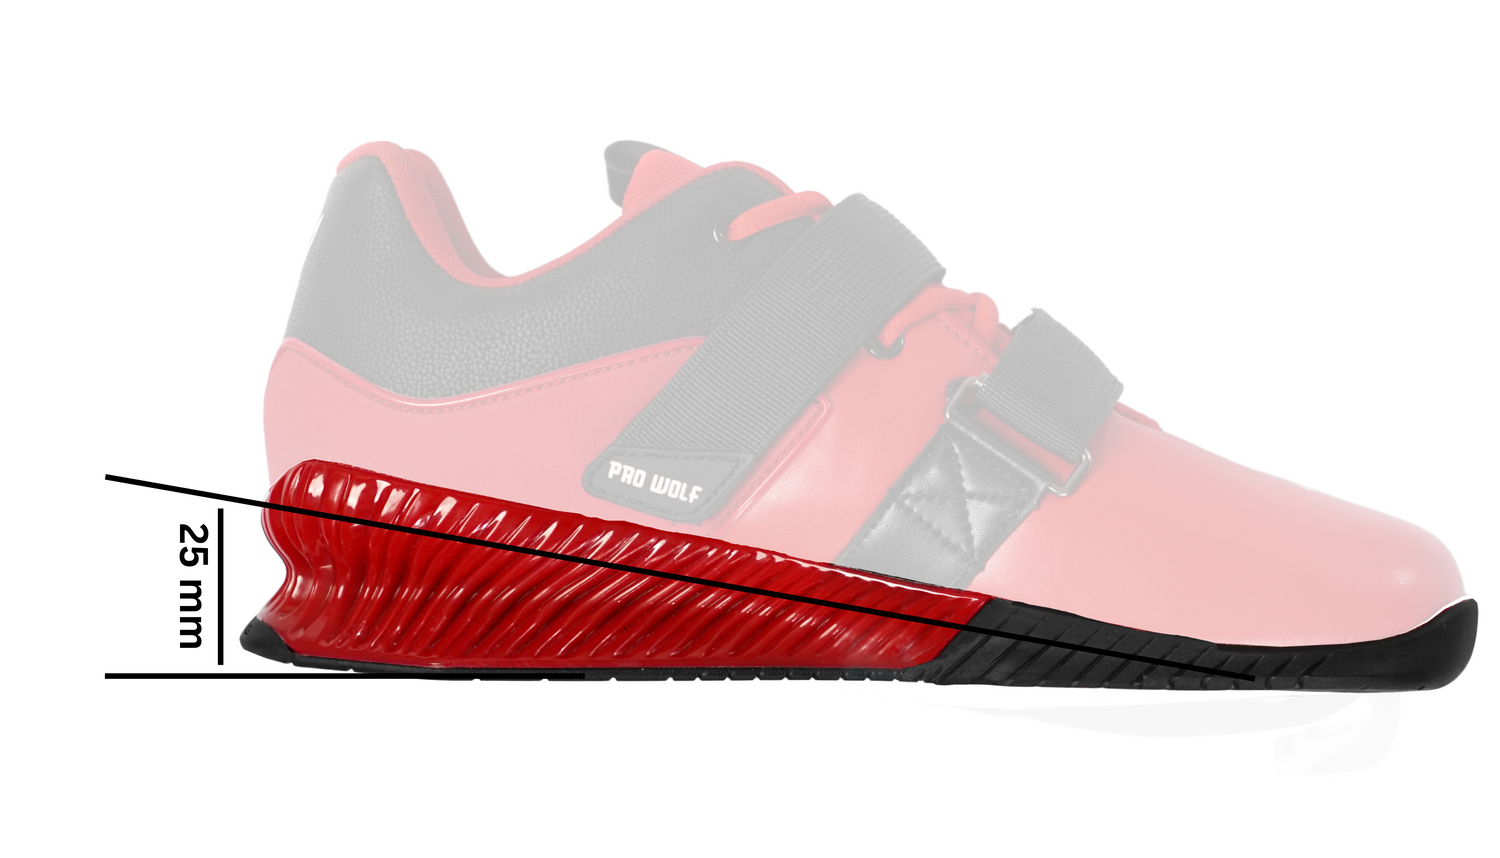 25mm heel red weightlifting shoes